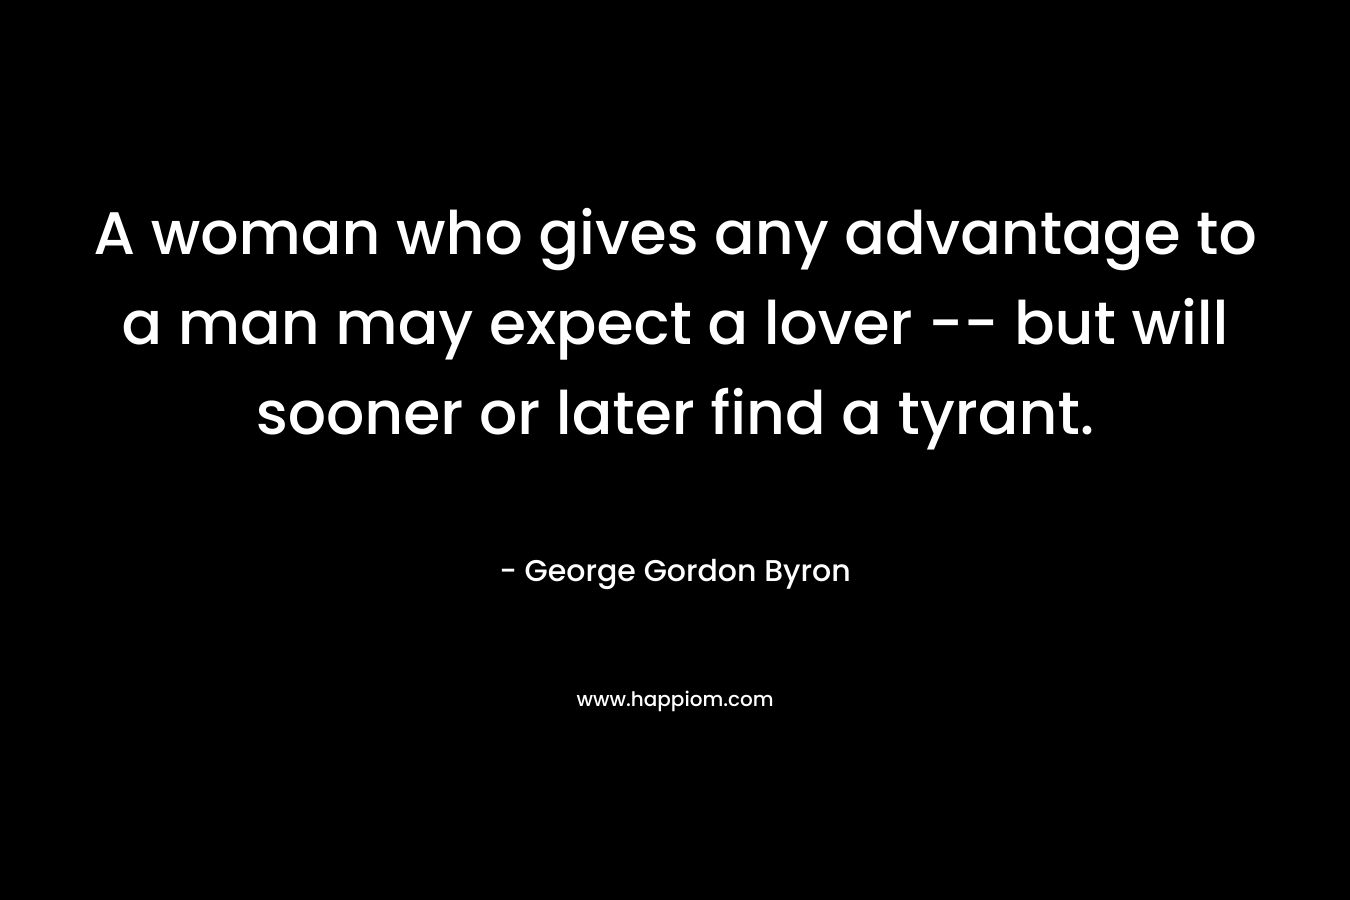 A woman who gives any advantage to a man may expect a lover -- but will sooner or later find a tyrant.